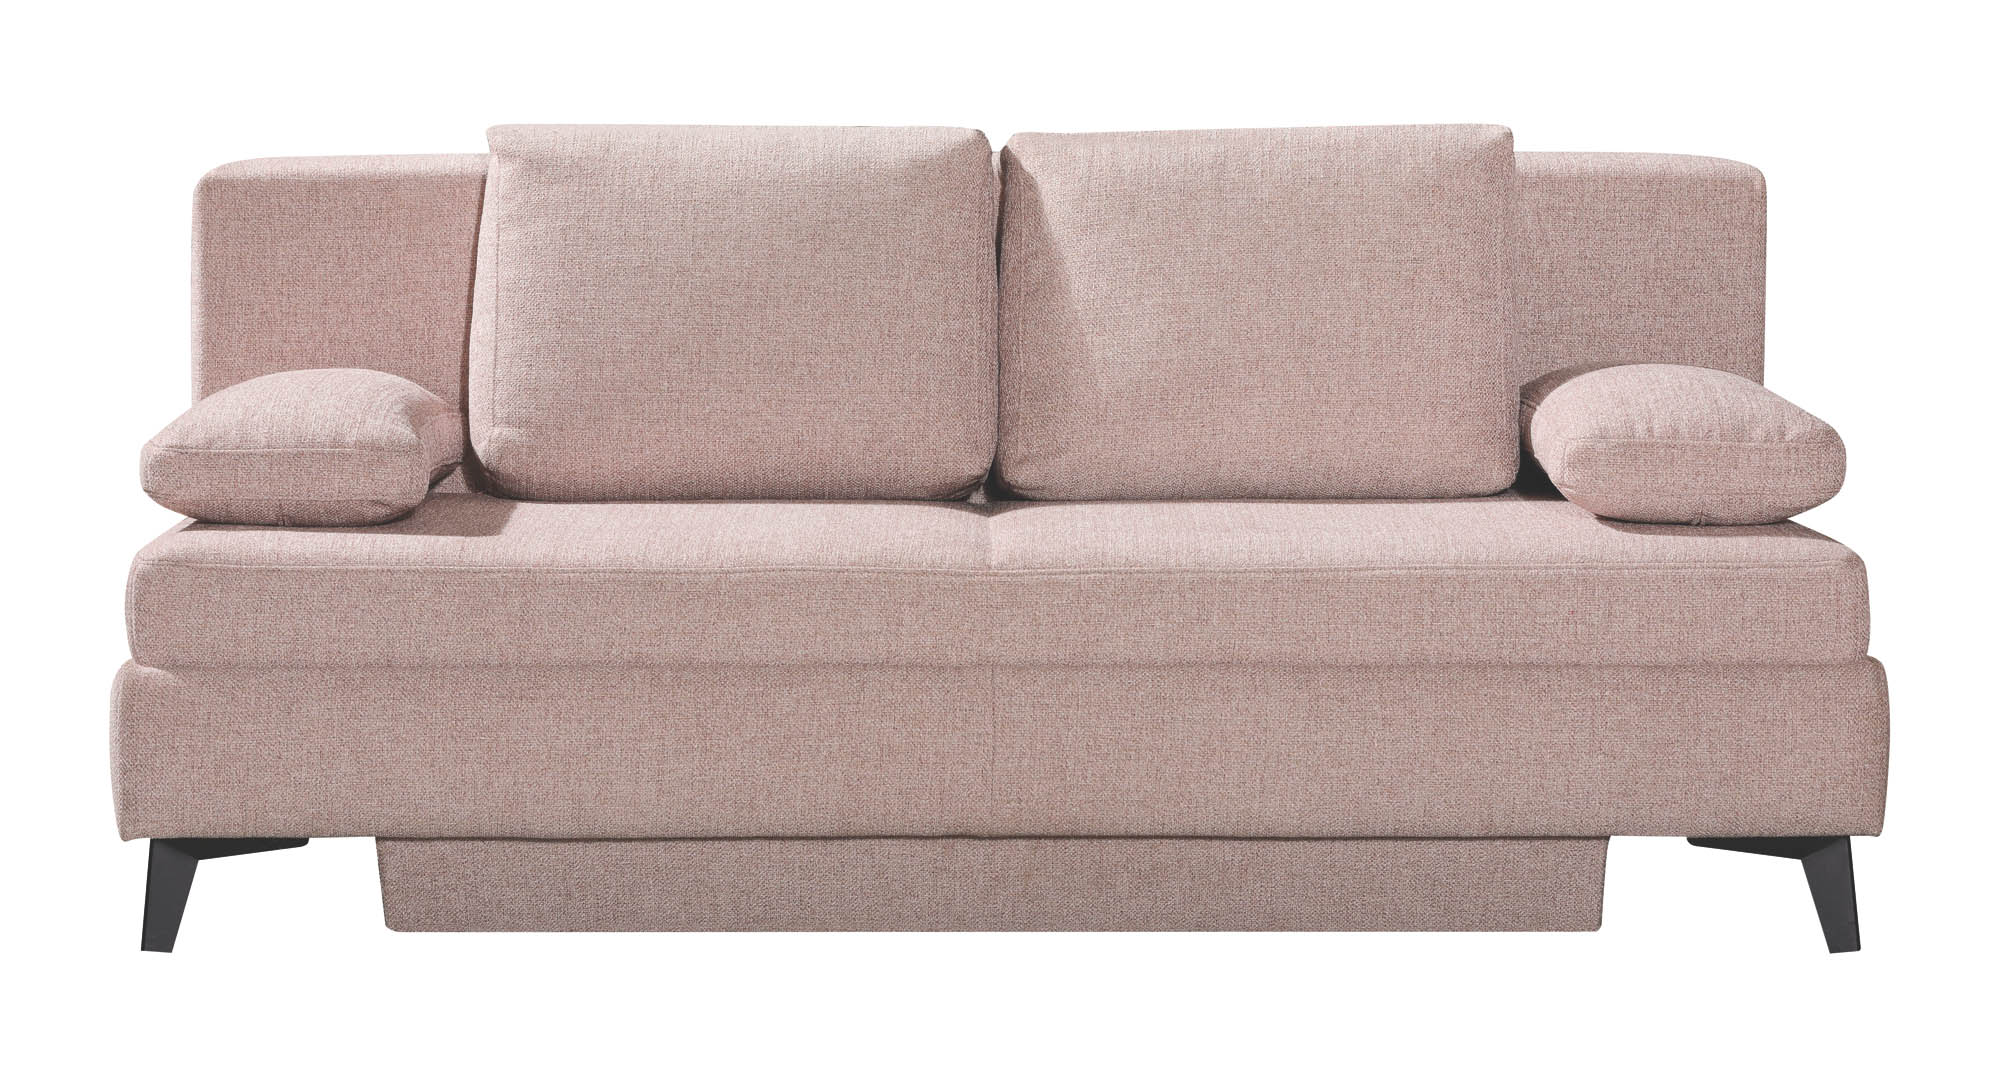 Restyl Berry Schlafsofa in Stoff Sand 